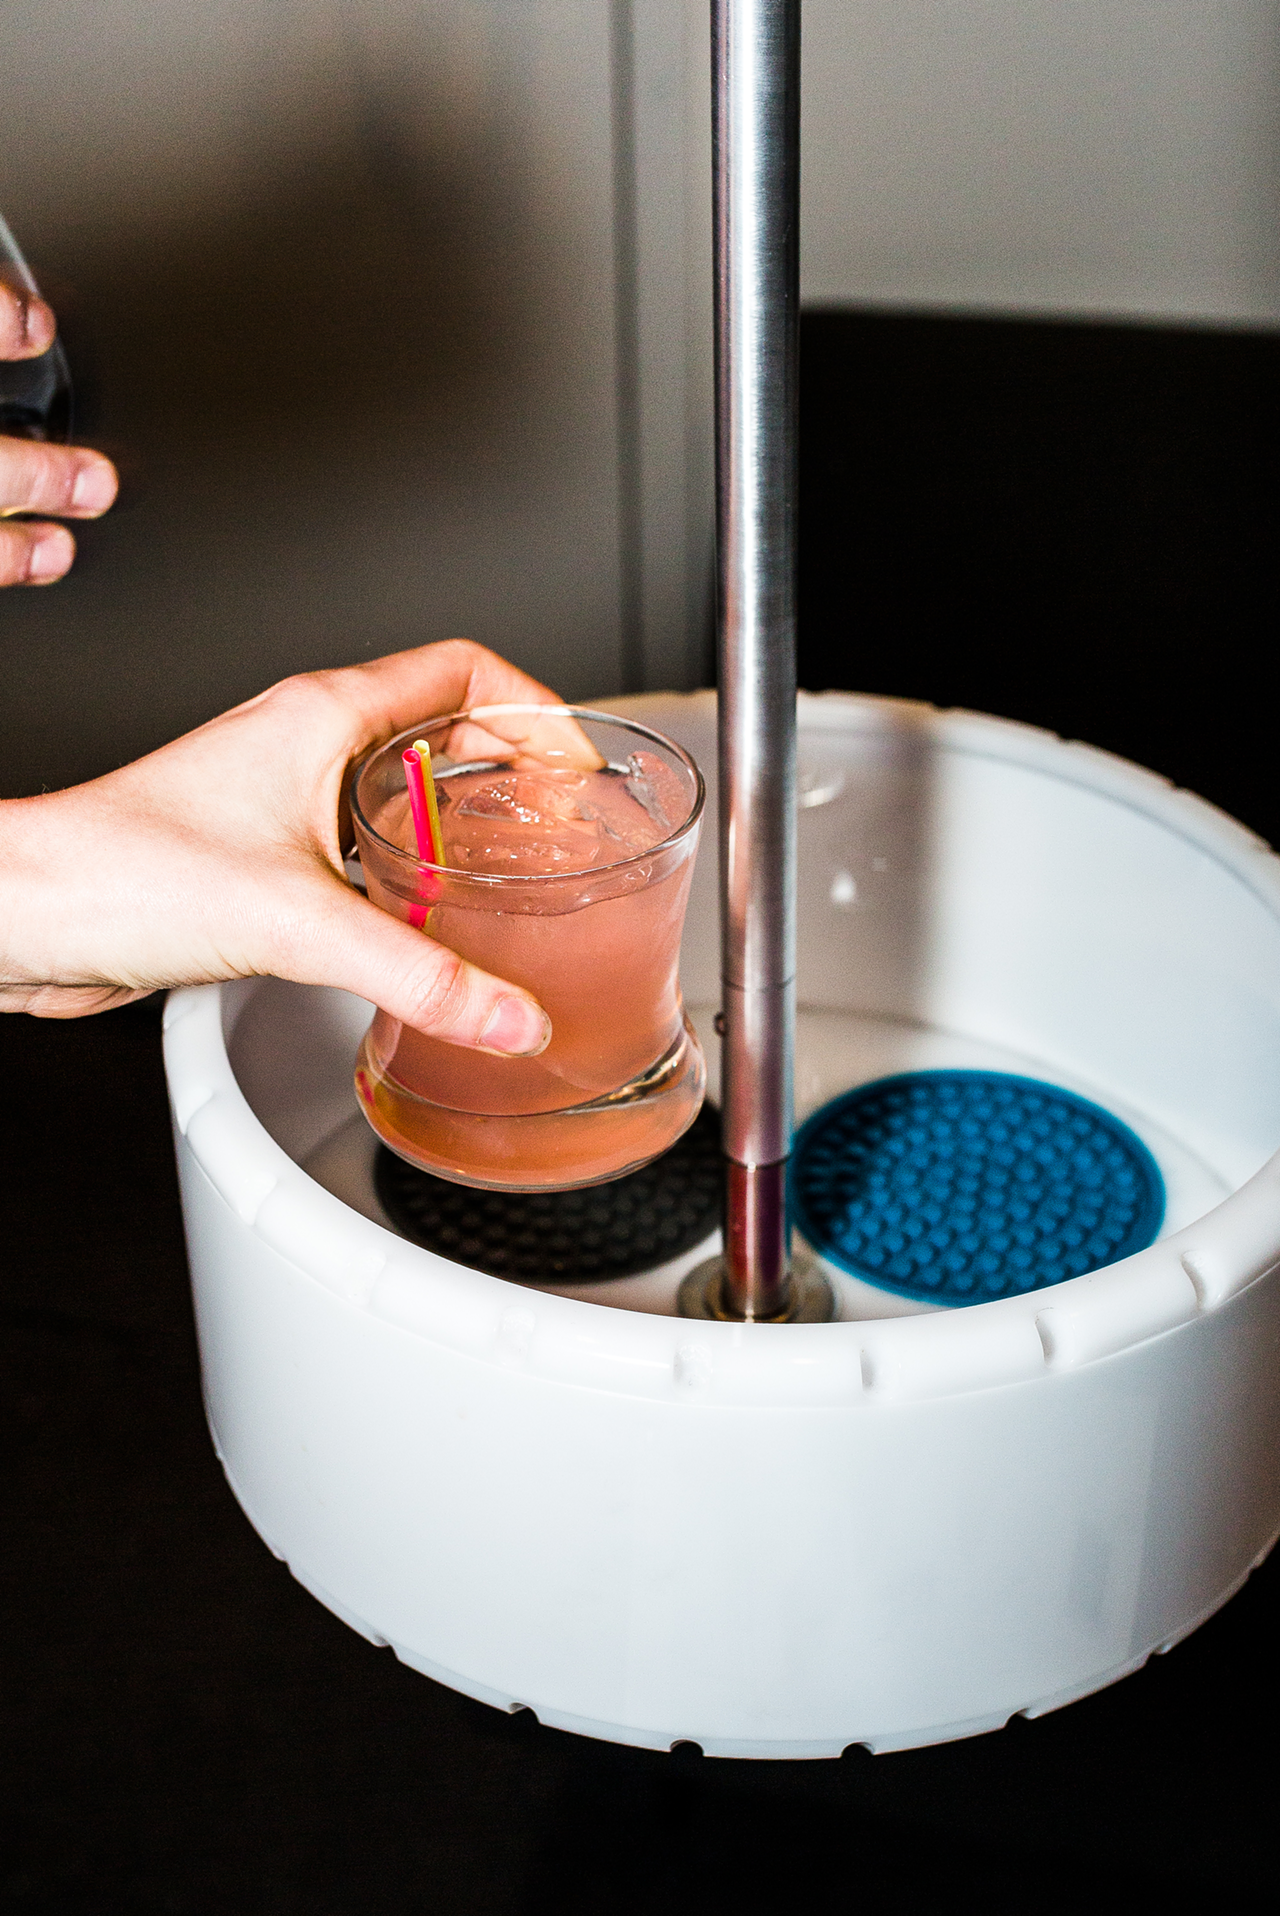 Bbot delivers drinks to private karaoke rooms